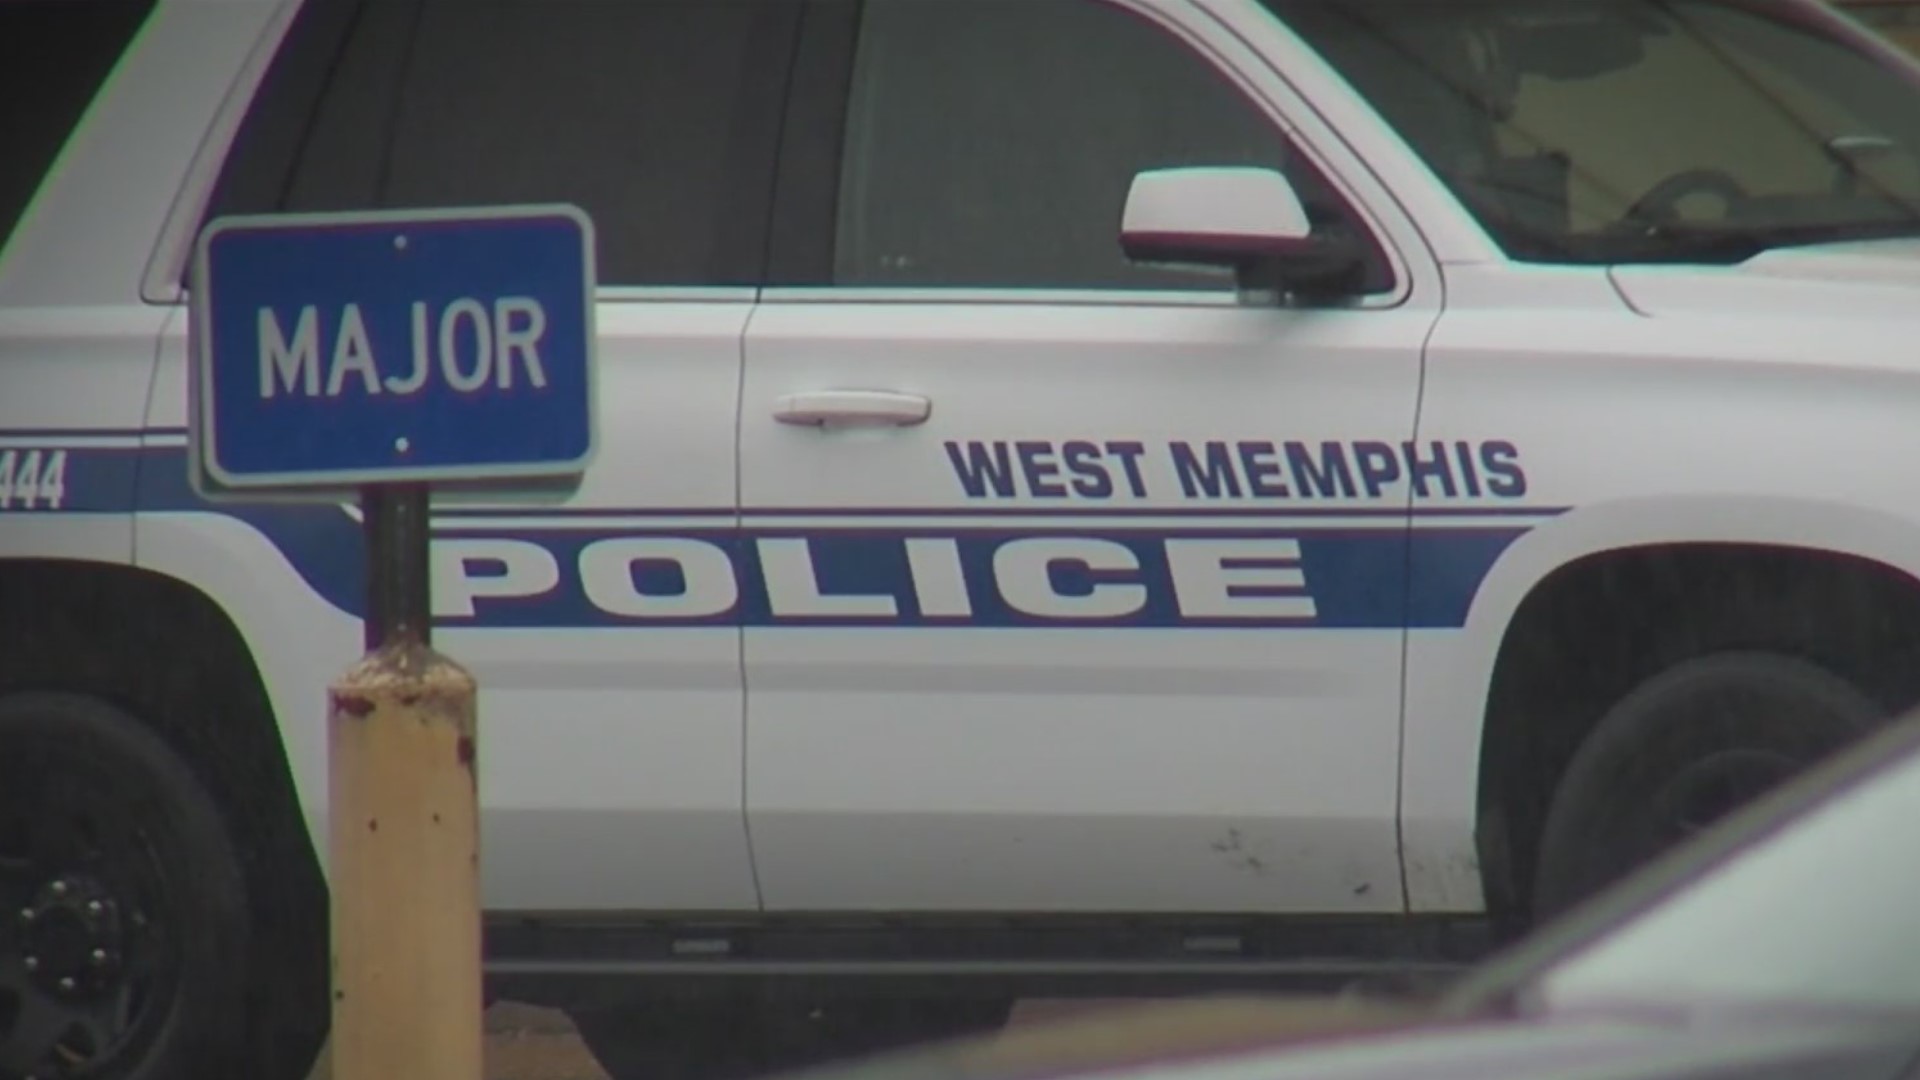 Anyone with additional information about the shooting is encouraged to call West Memphis Police at (870) 735 1210.